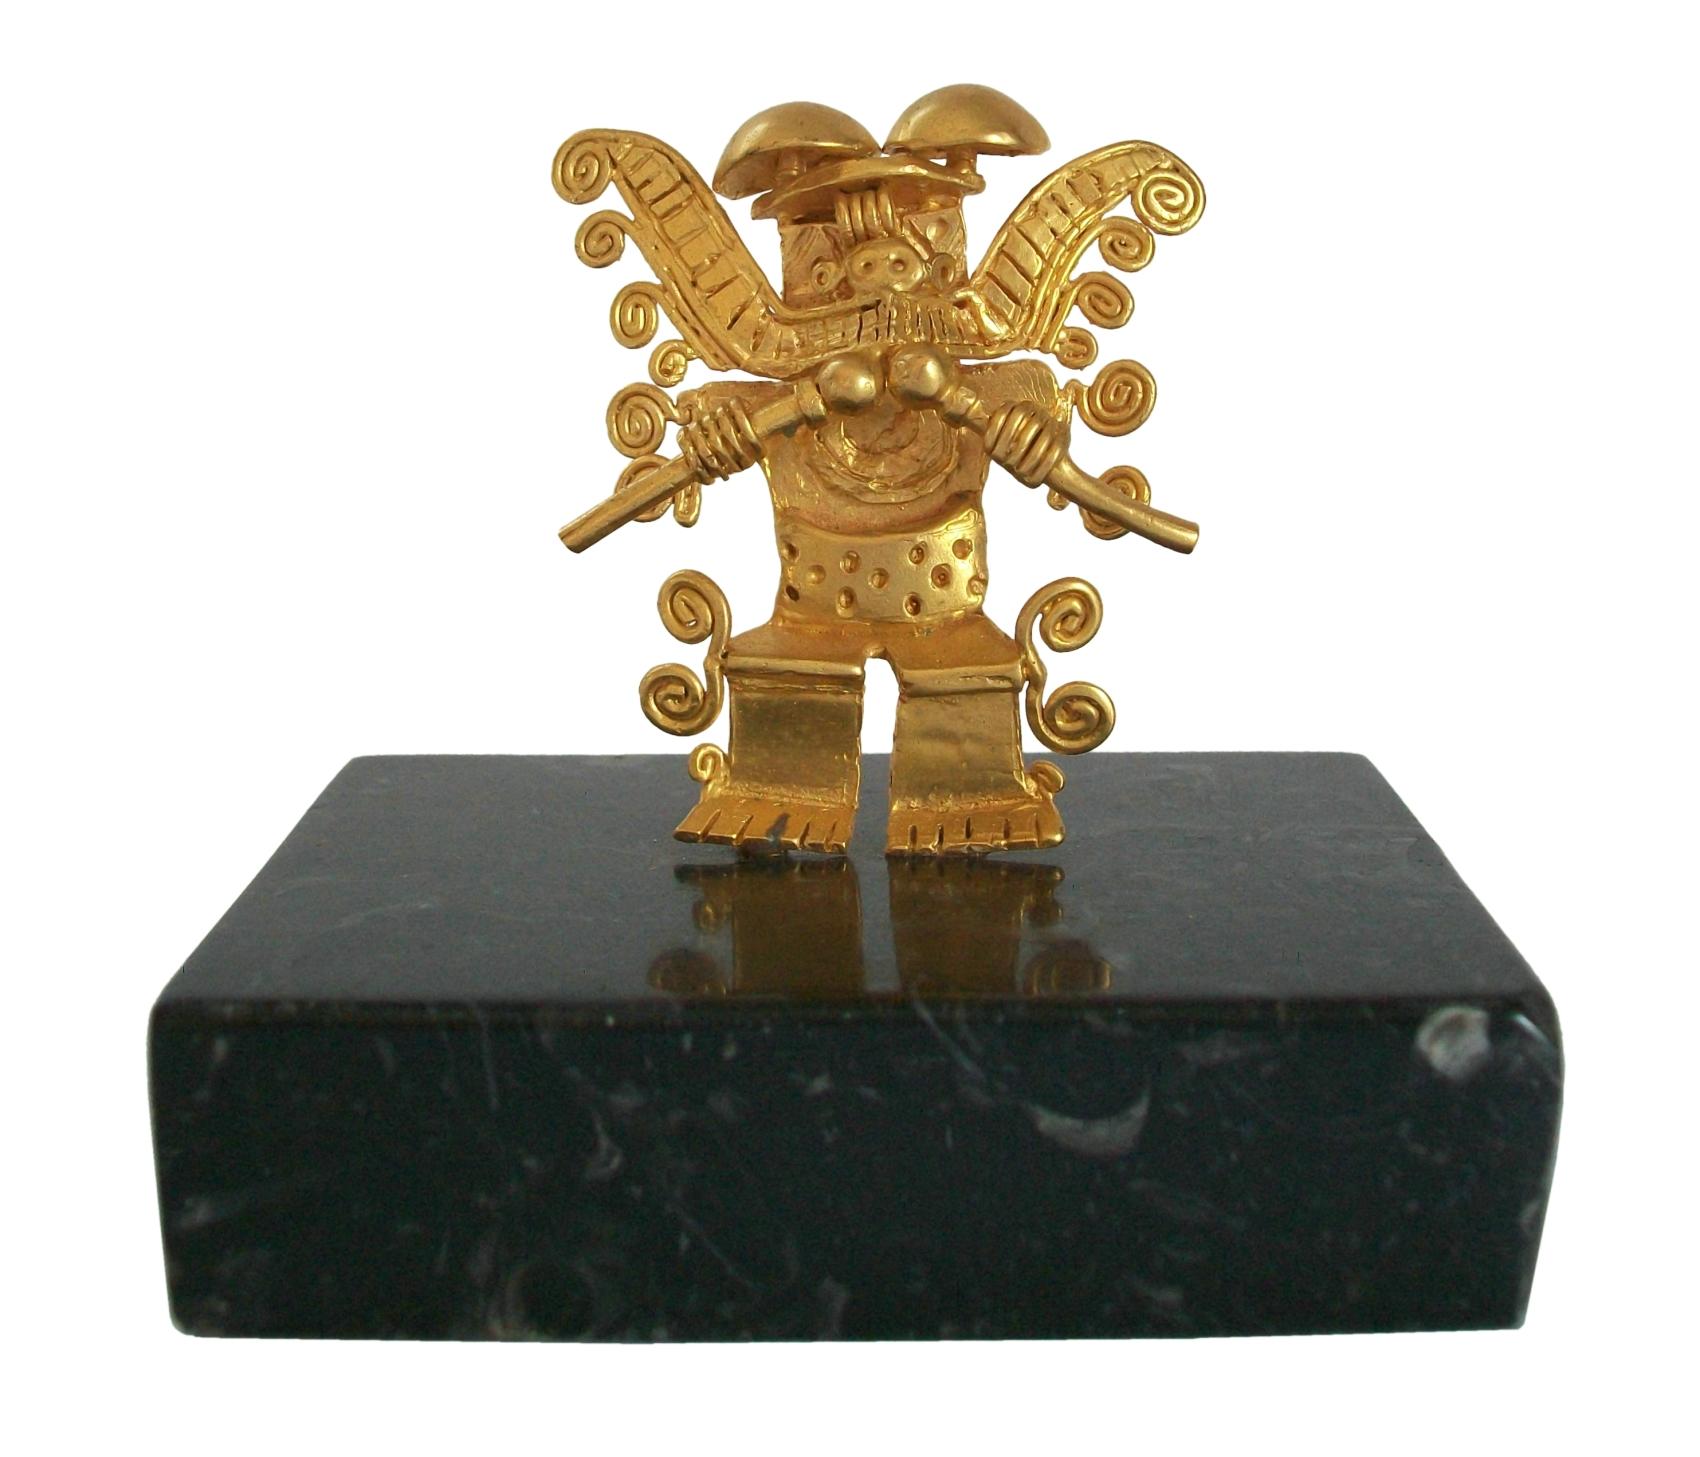 GALERIA MUSEO DE ORO - Vintage museum reproduction Pre-Hispanic artifact - gold plated bronze - marble plinth - original presentation box - signed MO on the back of the artifact - Columbia - circa 1980's.

Excellent vintage condition - minor chip